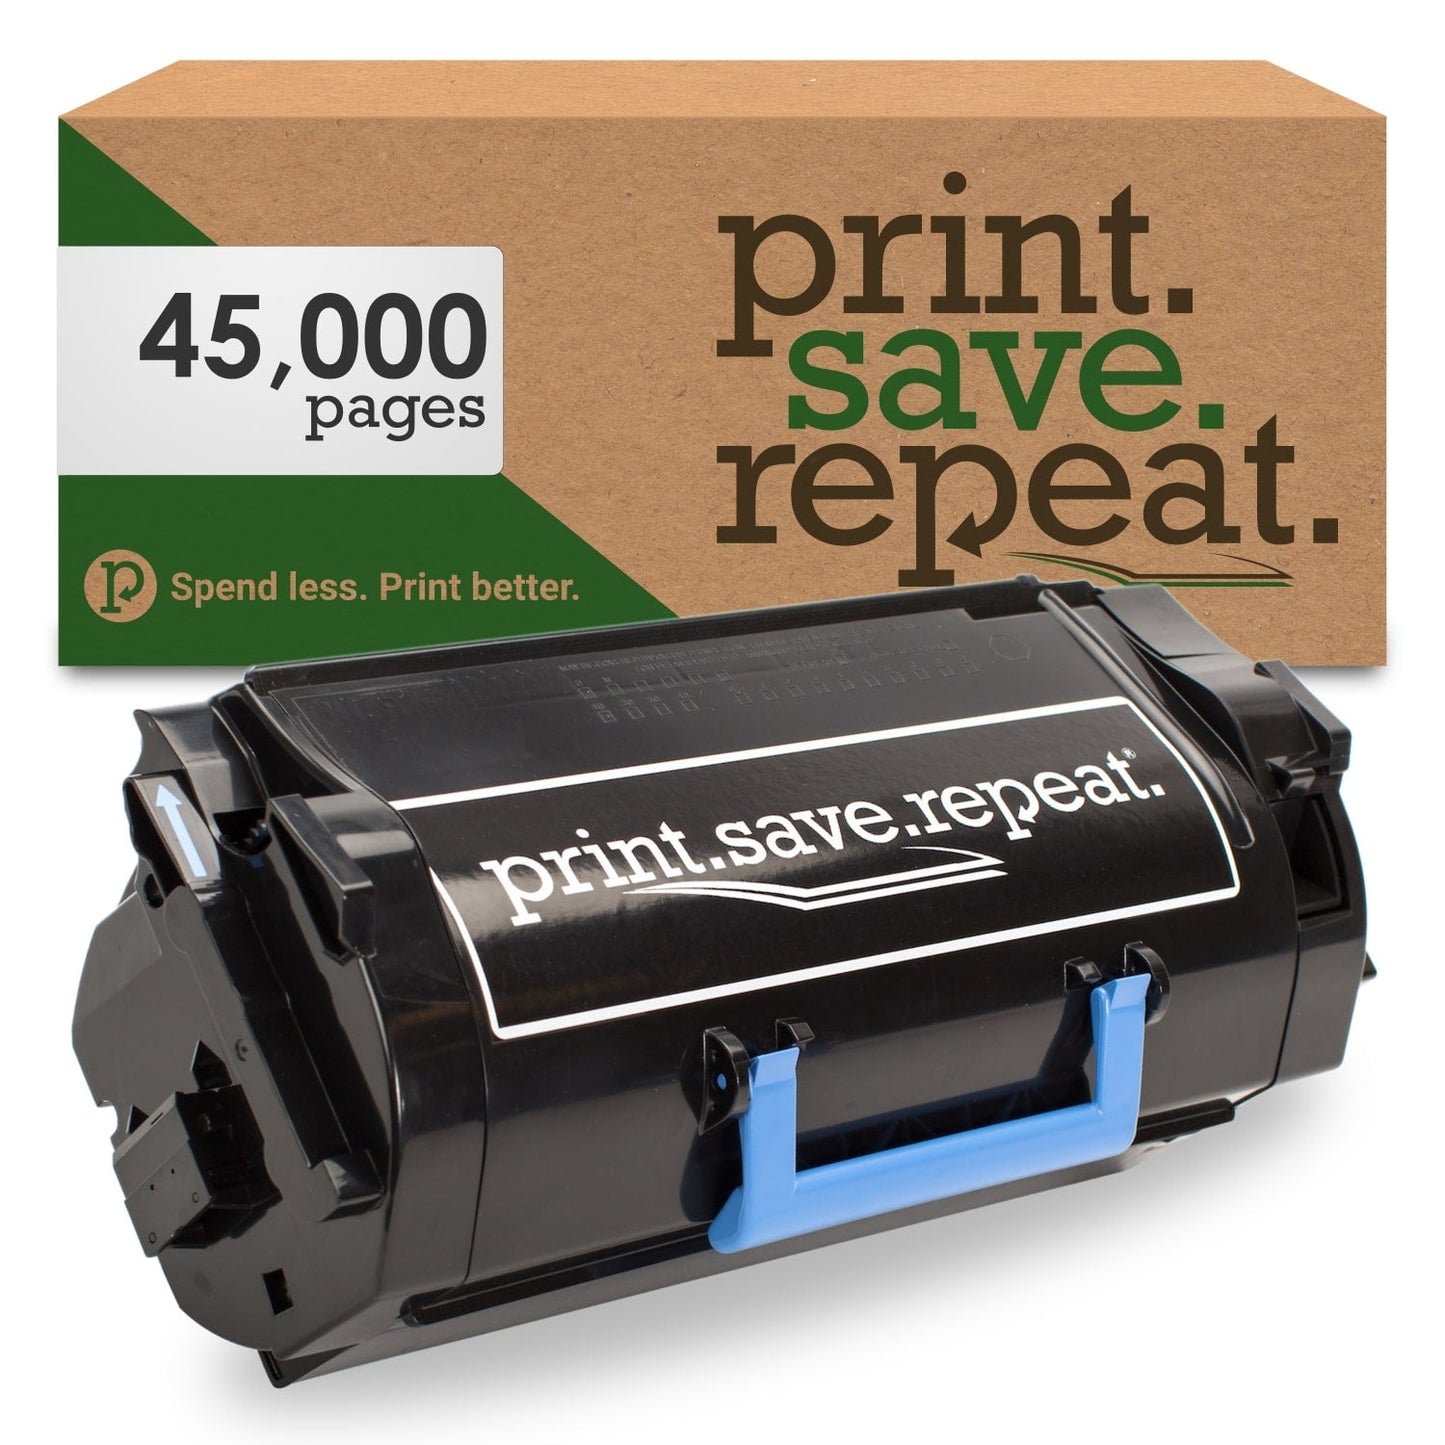 Print.Save.Repeat. Dell 8XTXR Extra High Yield Remanufactured Toner Cartridge for S5830 [45,000 Pages]